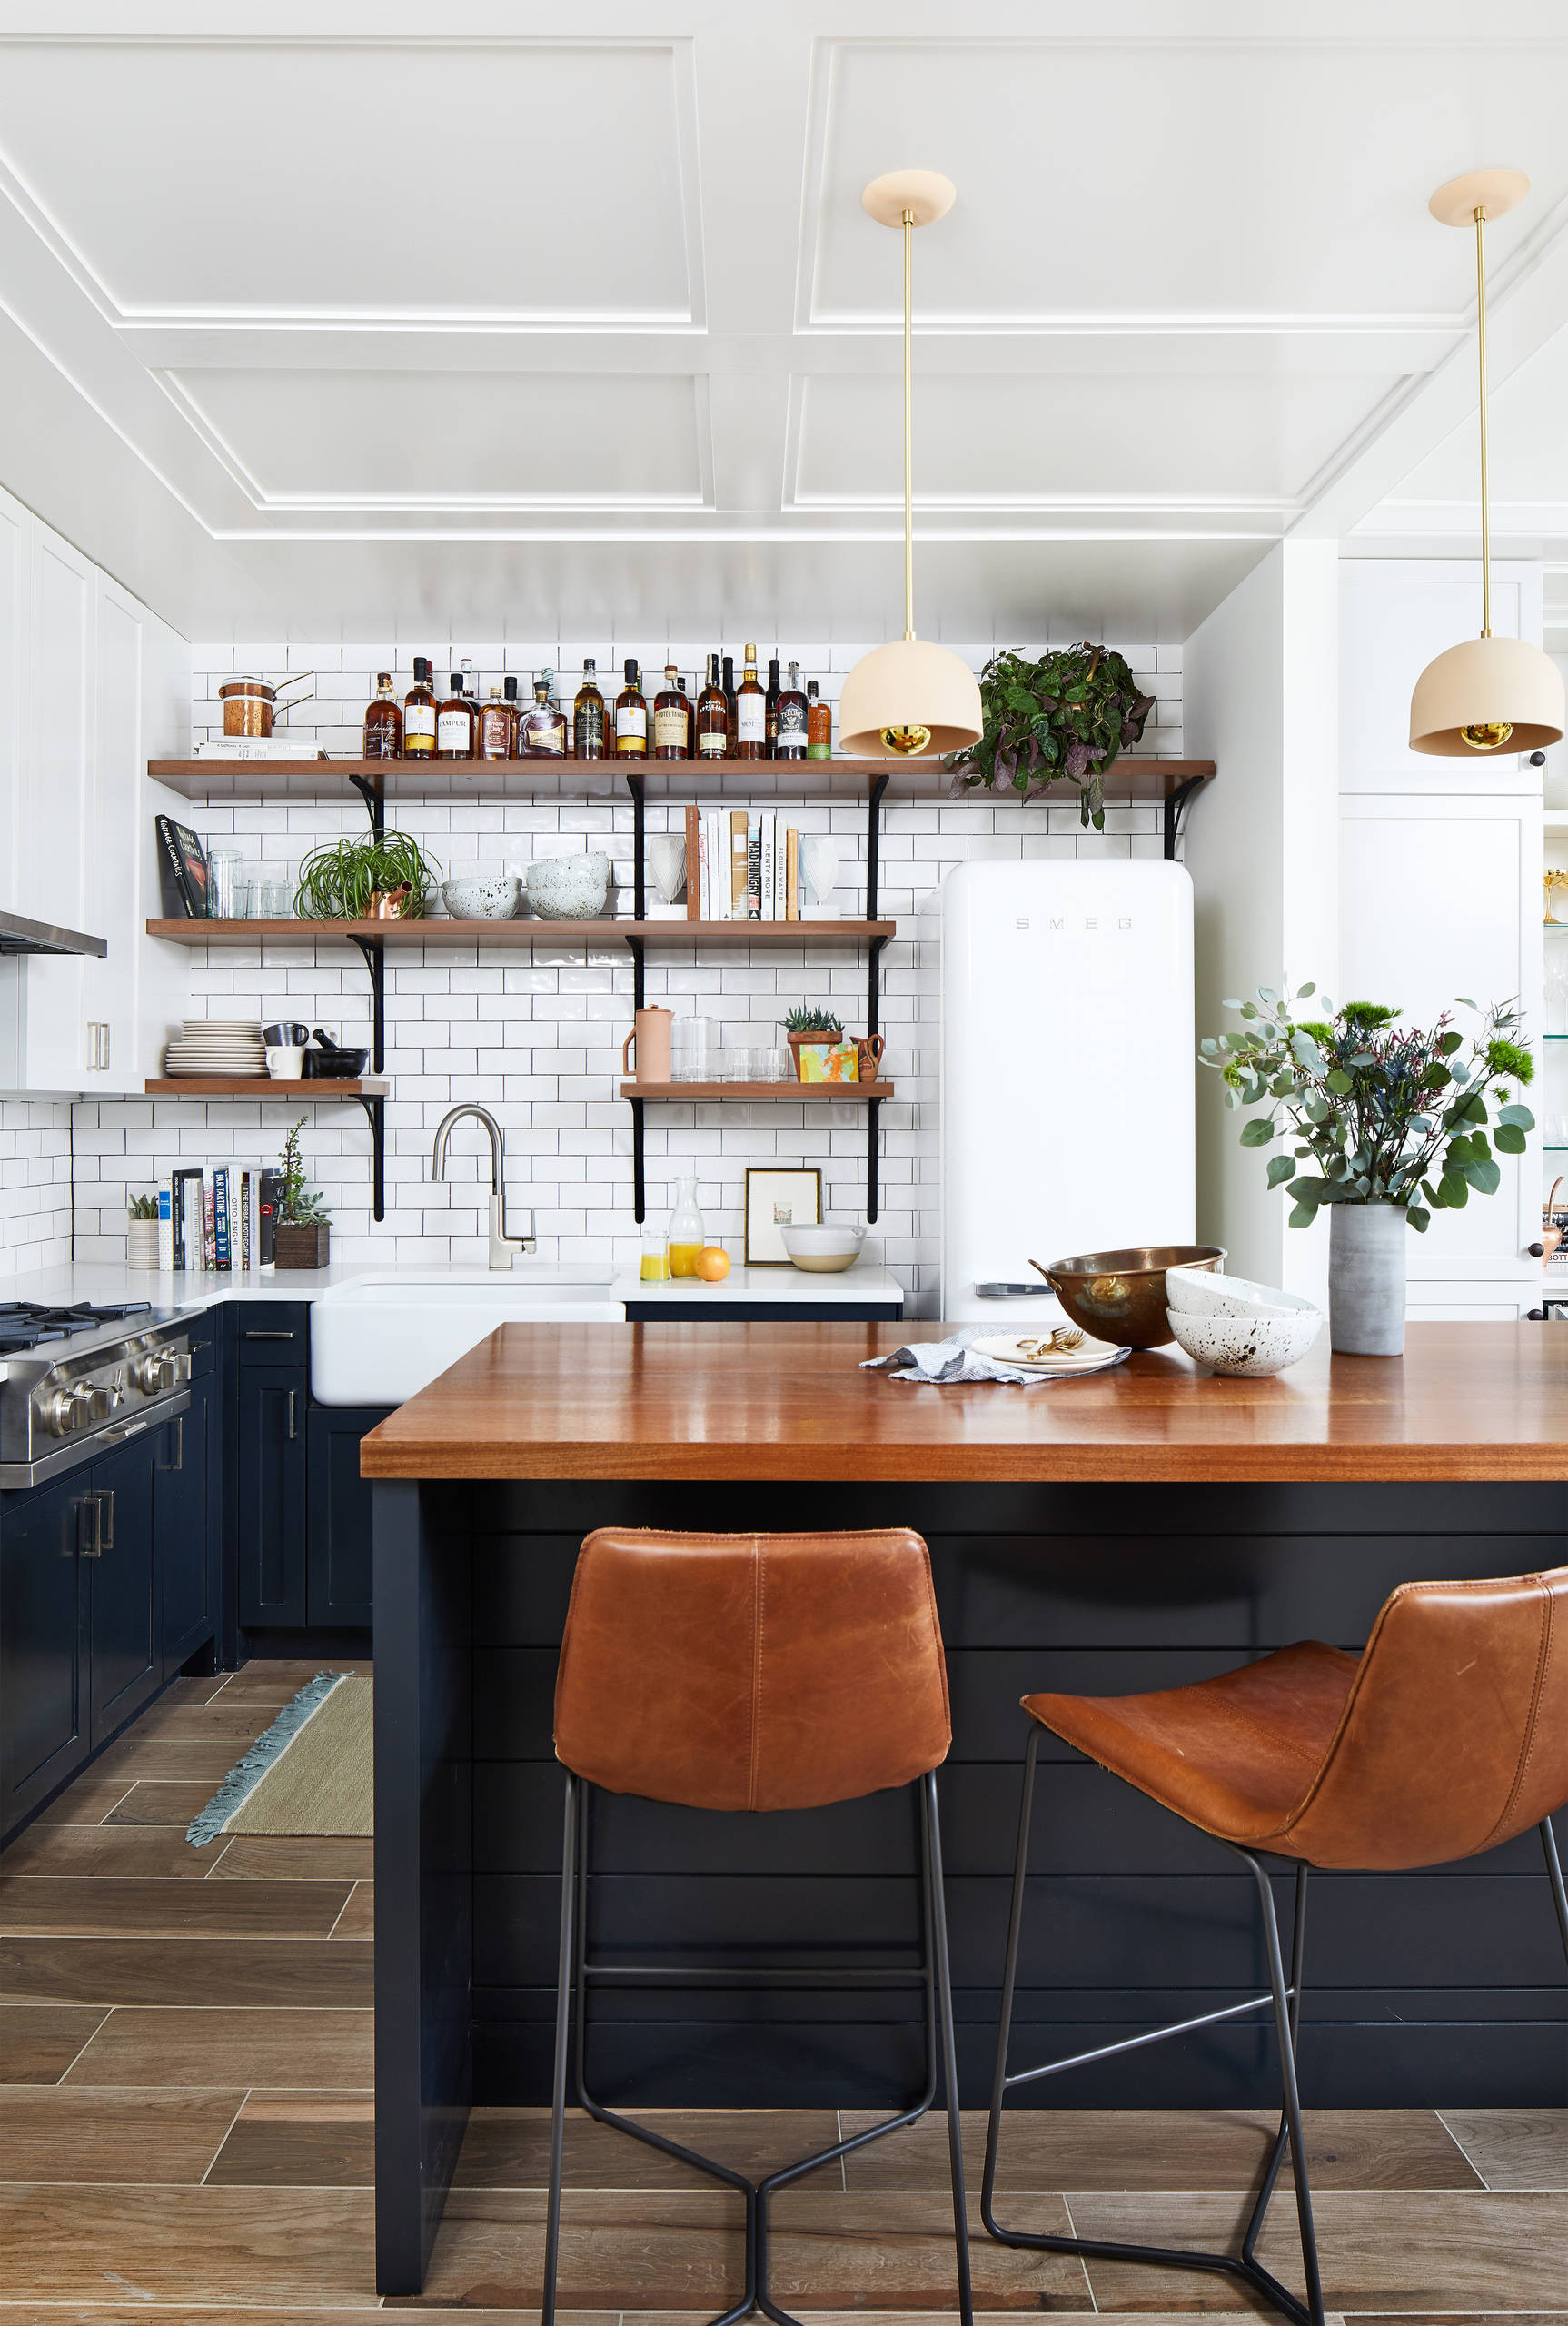 75 Beautiful Small Kitchen Pictures Ideas July 2021 Houzz